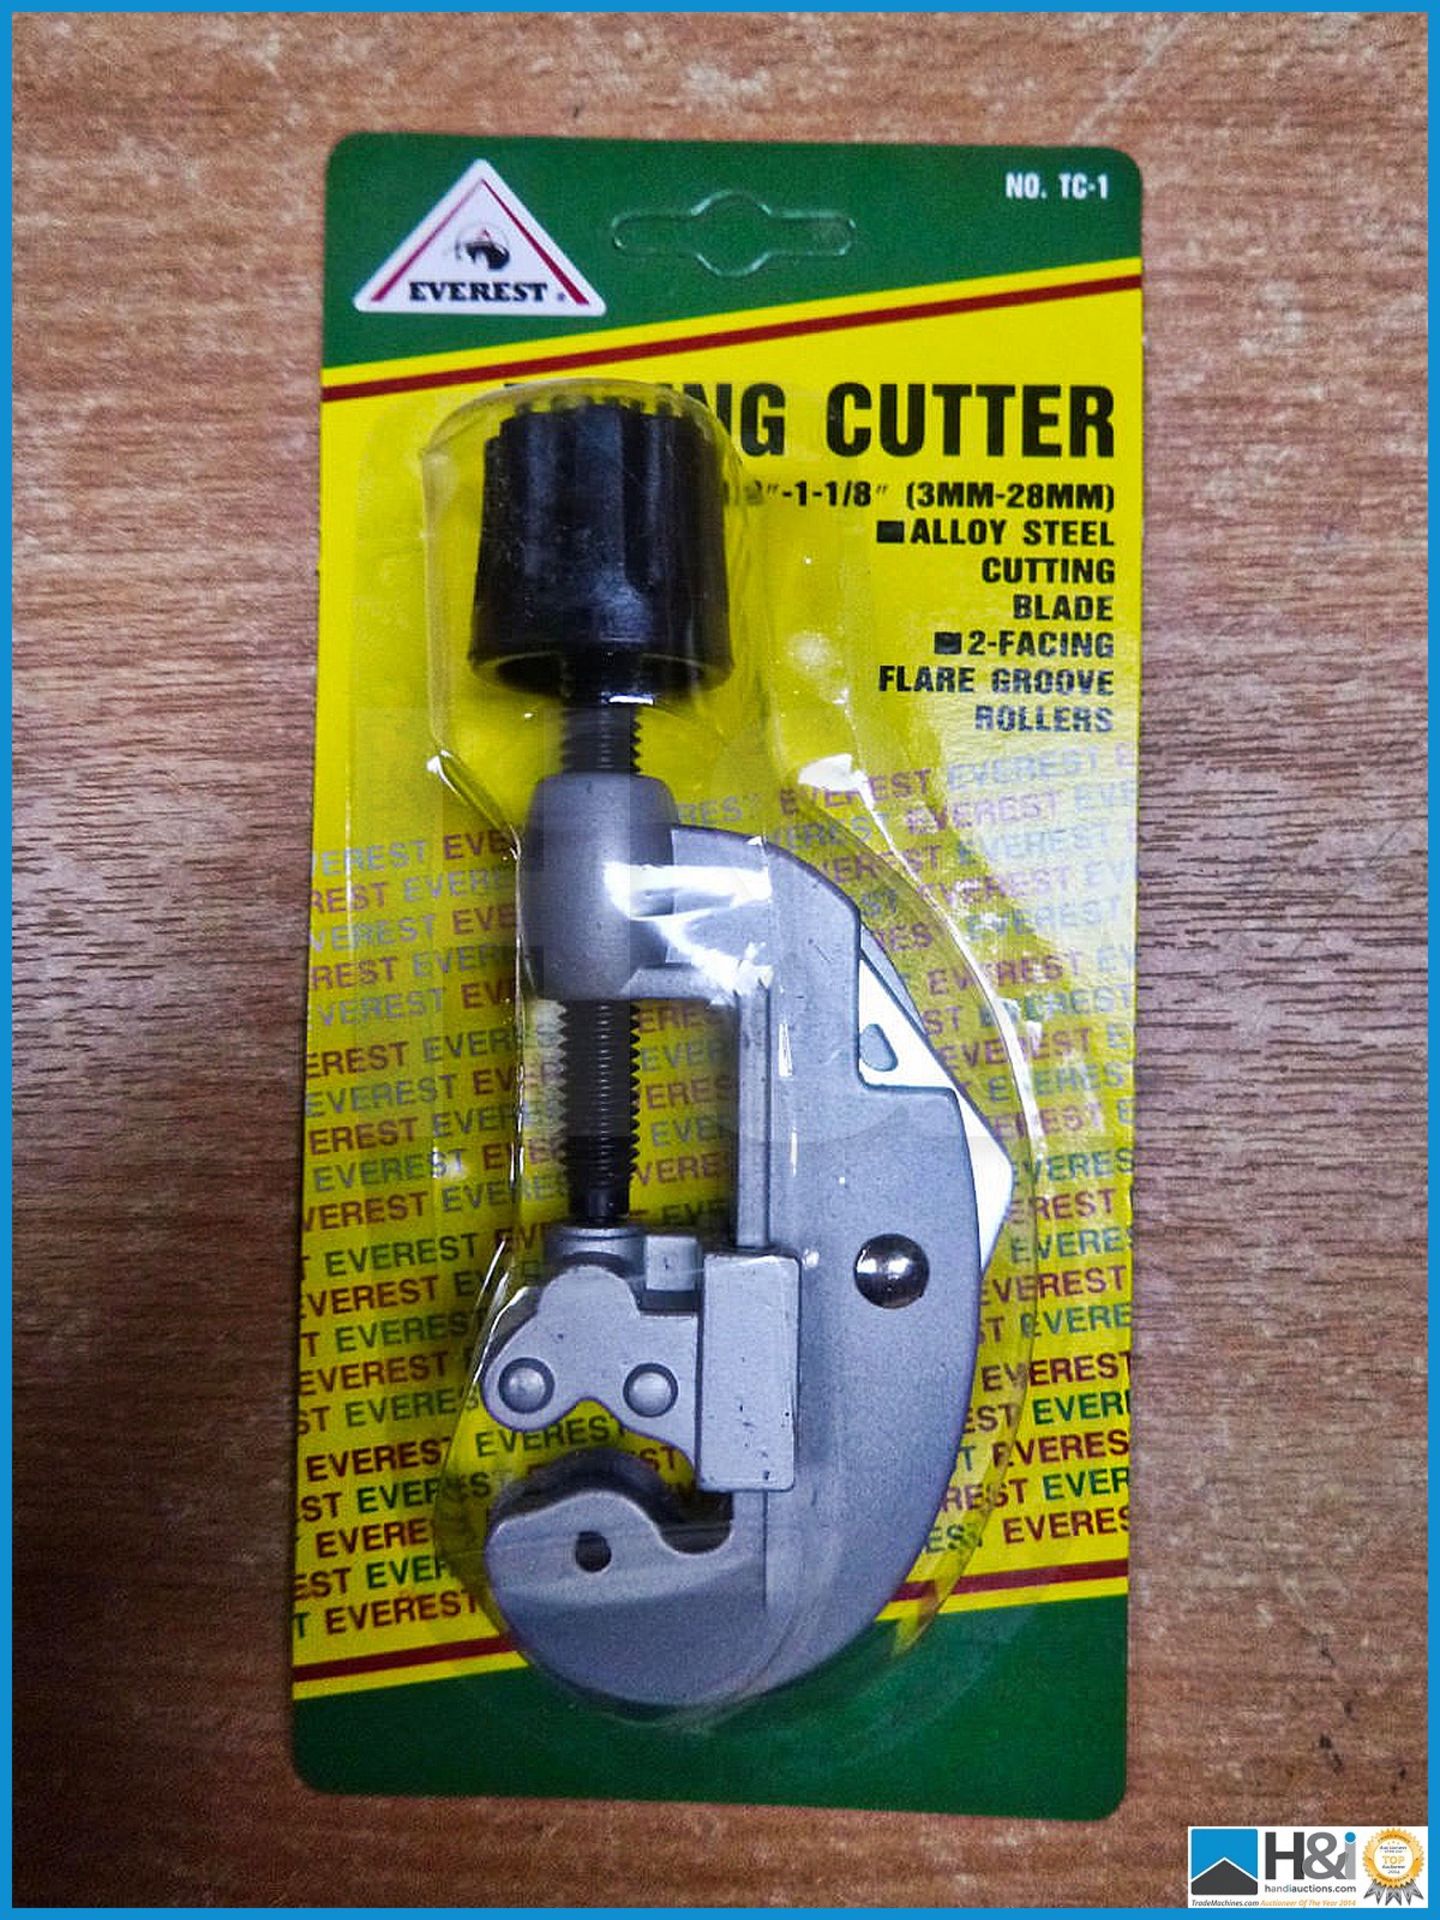 Everest pipe cutter 3mm - 28mm.